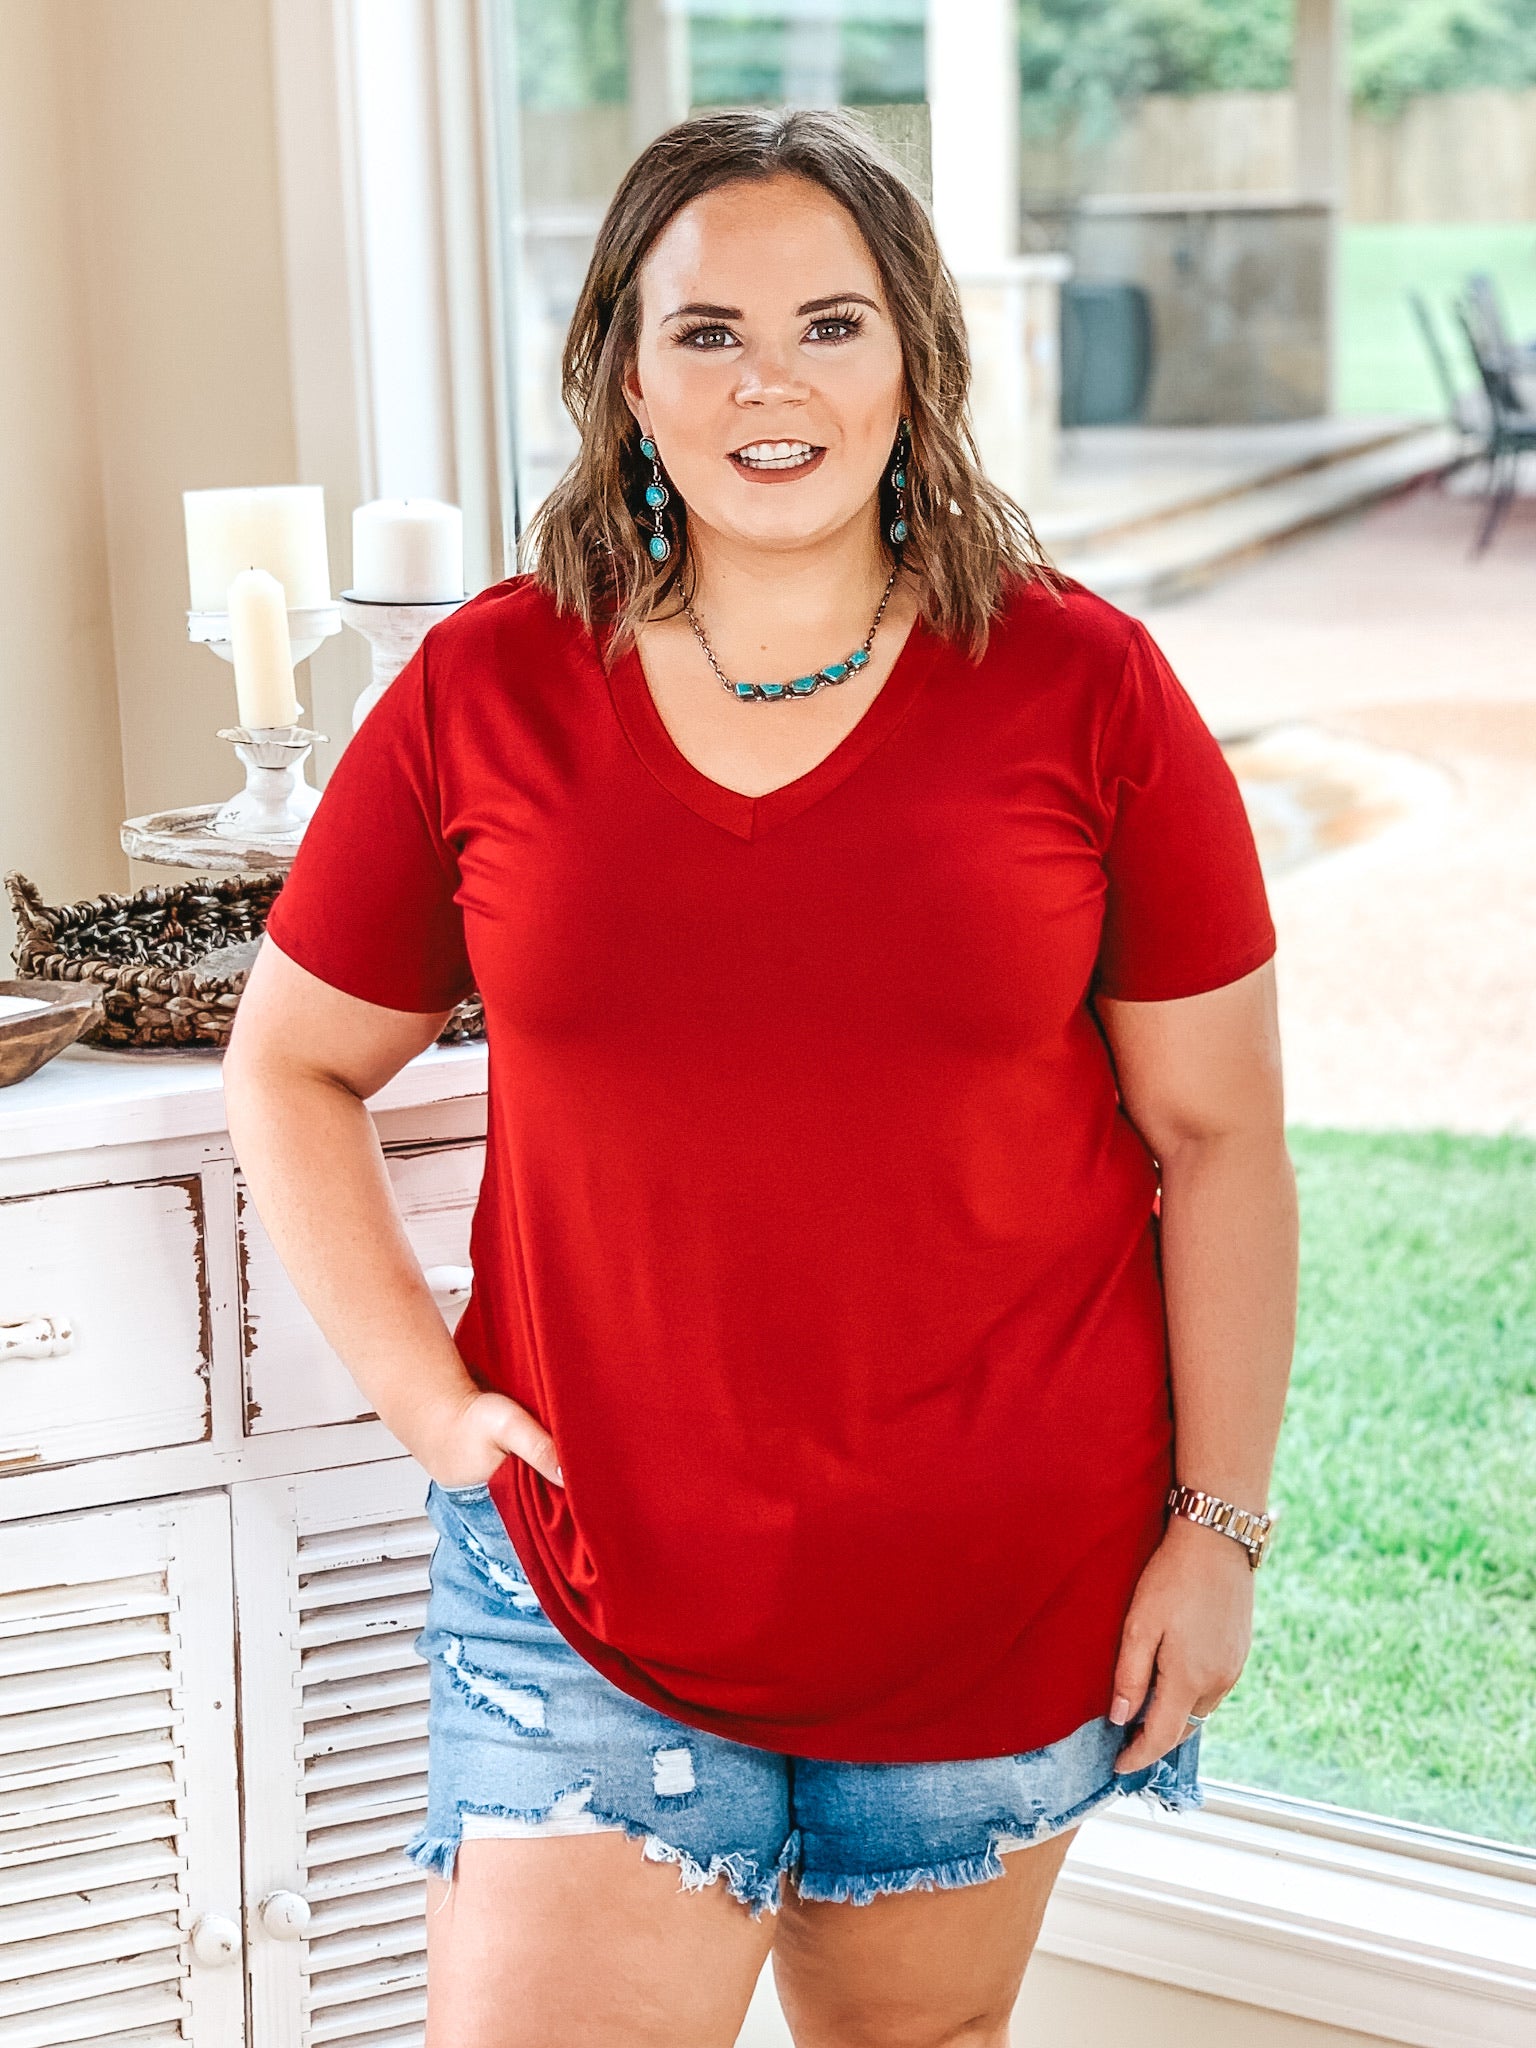 It's That Simple Solid V Neck Tee in Maroon - Giddy Up Glamour Boutique